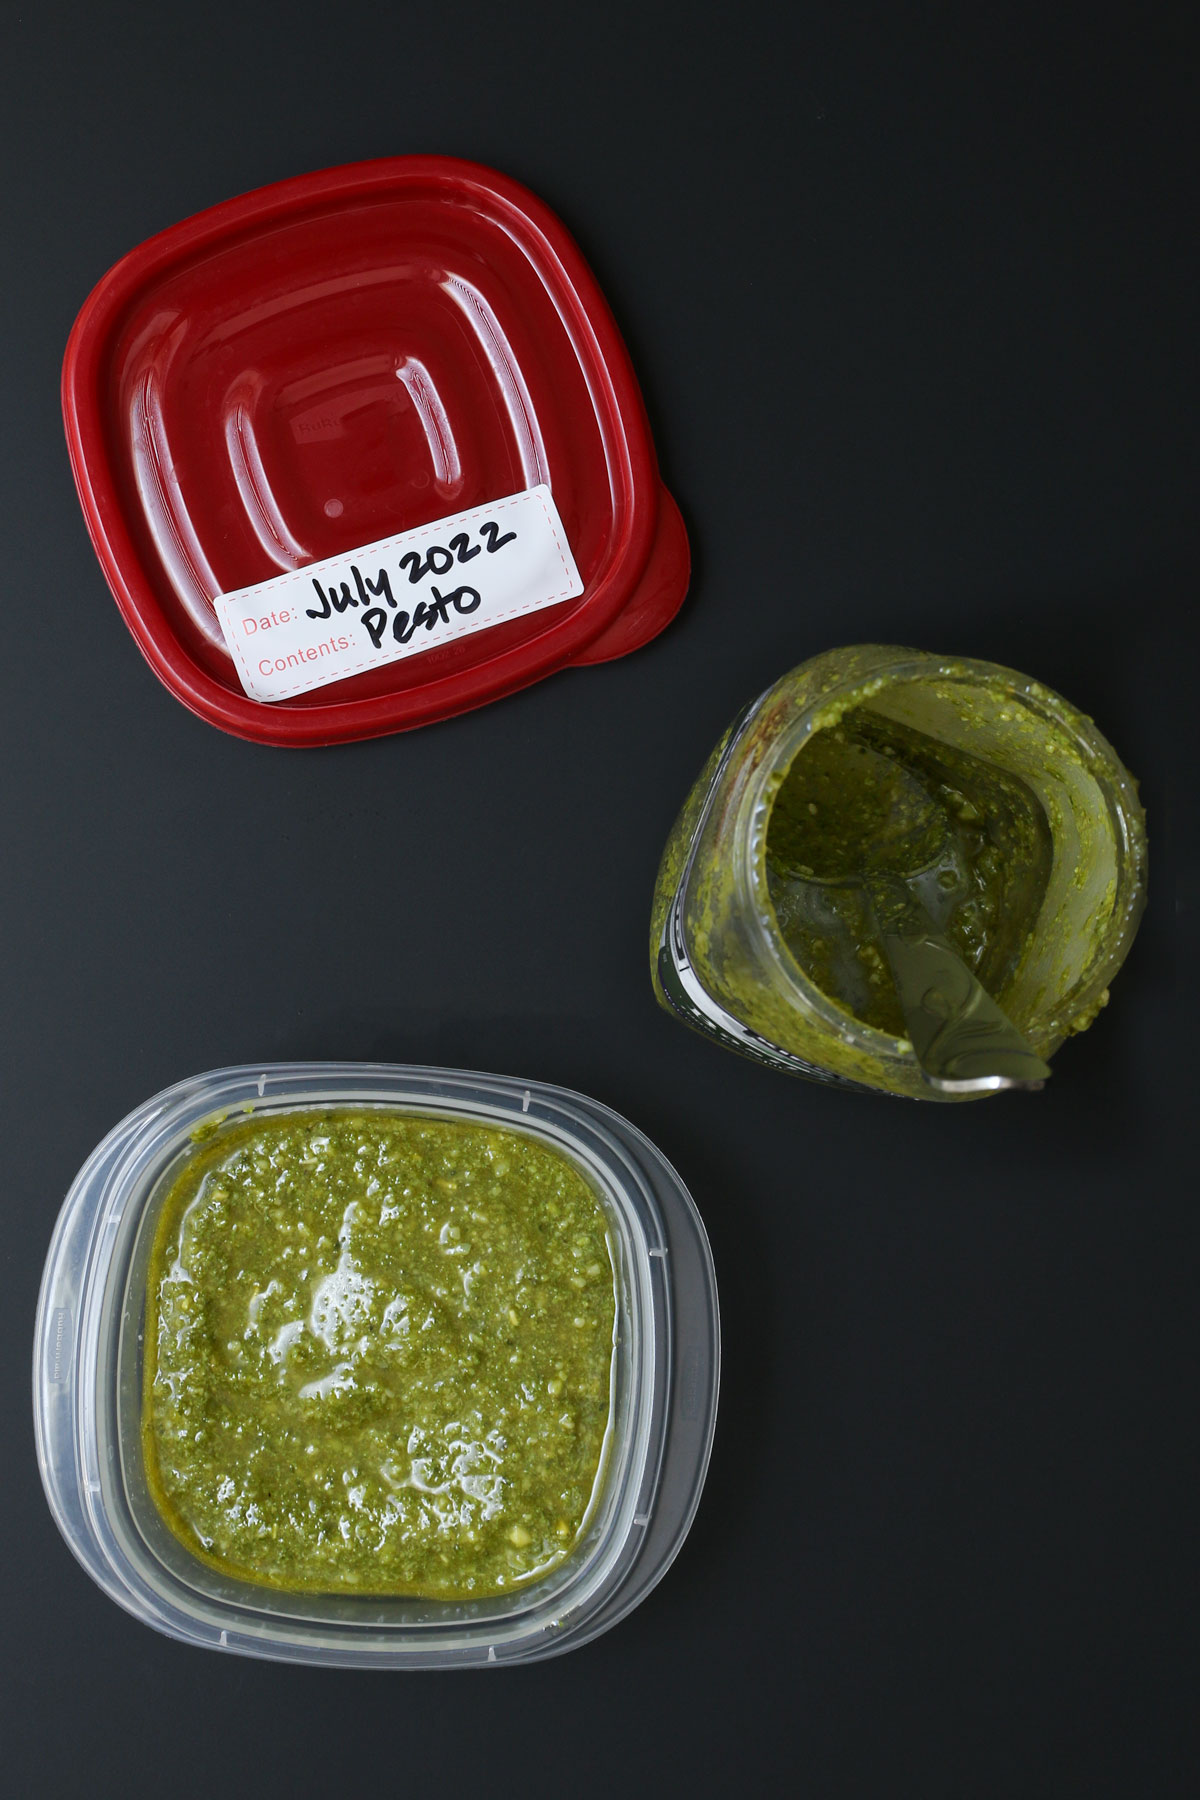 pesto tub with spoon next to a small food container with labeled red lid.